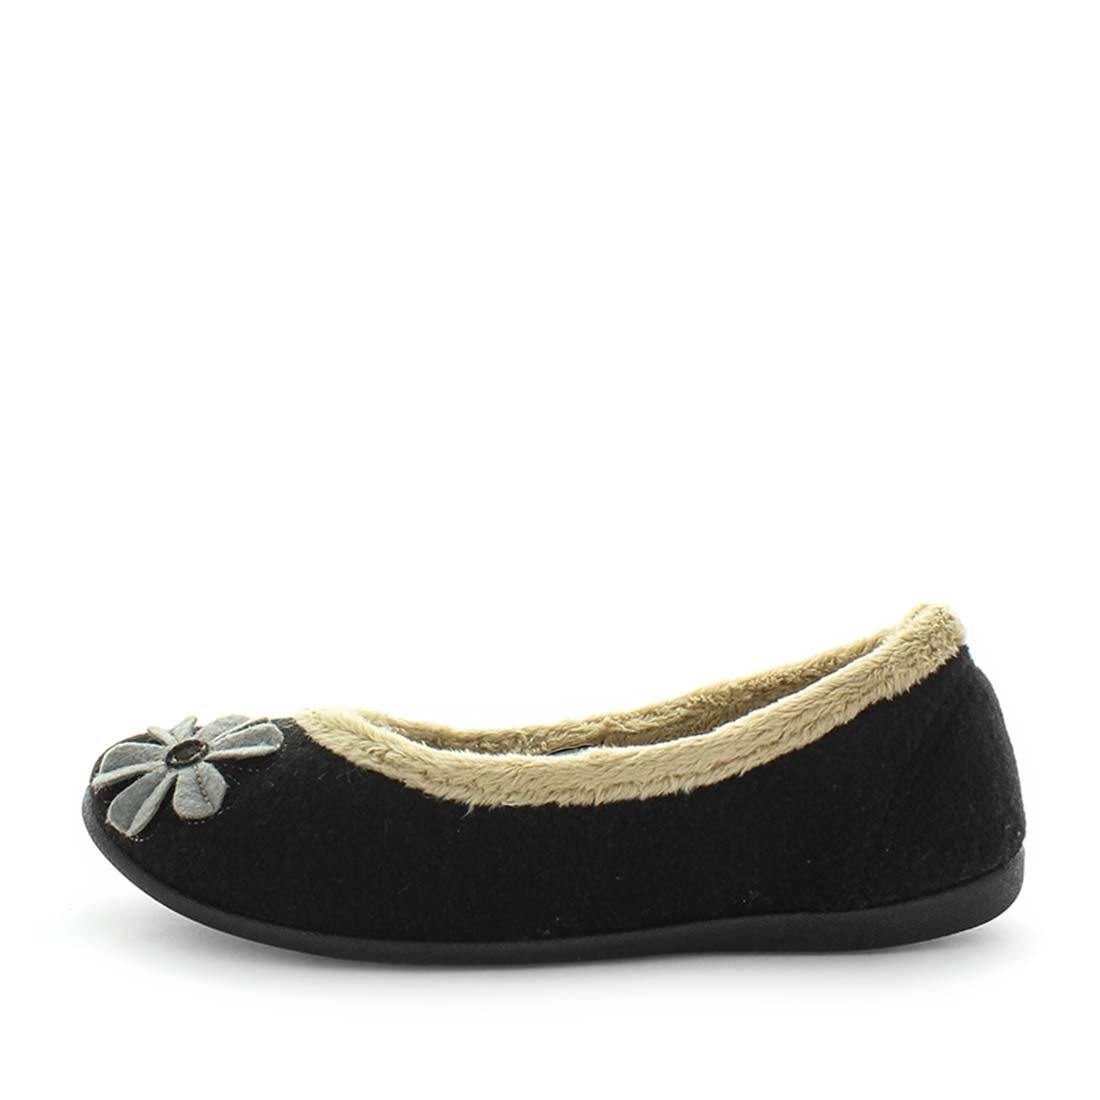 Load image into Gallery viewer, womens slippers - Soft back Elgin slipper with a flower design, by panda Slippers. A ballet flat slipper with a soft micro-terry lining that is soft to the touch and comfy. Designed with an extra comfy fit with a padded footbed.
